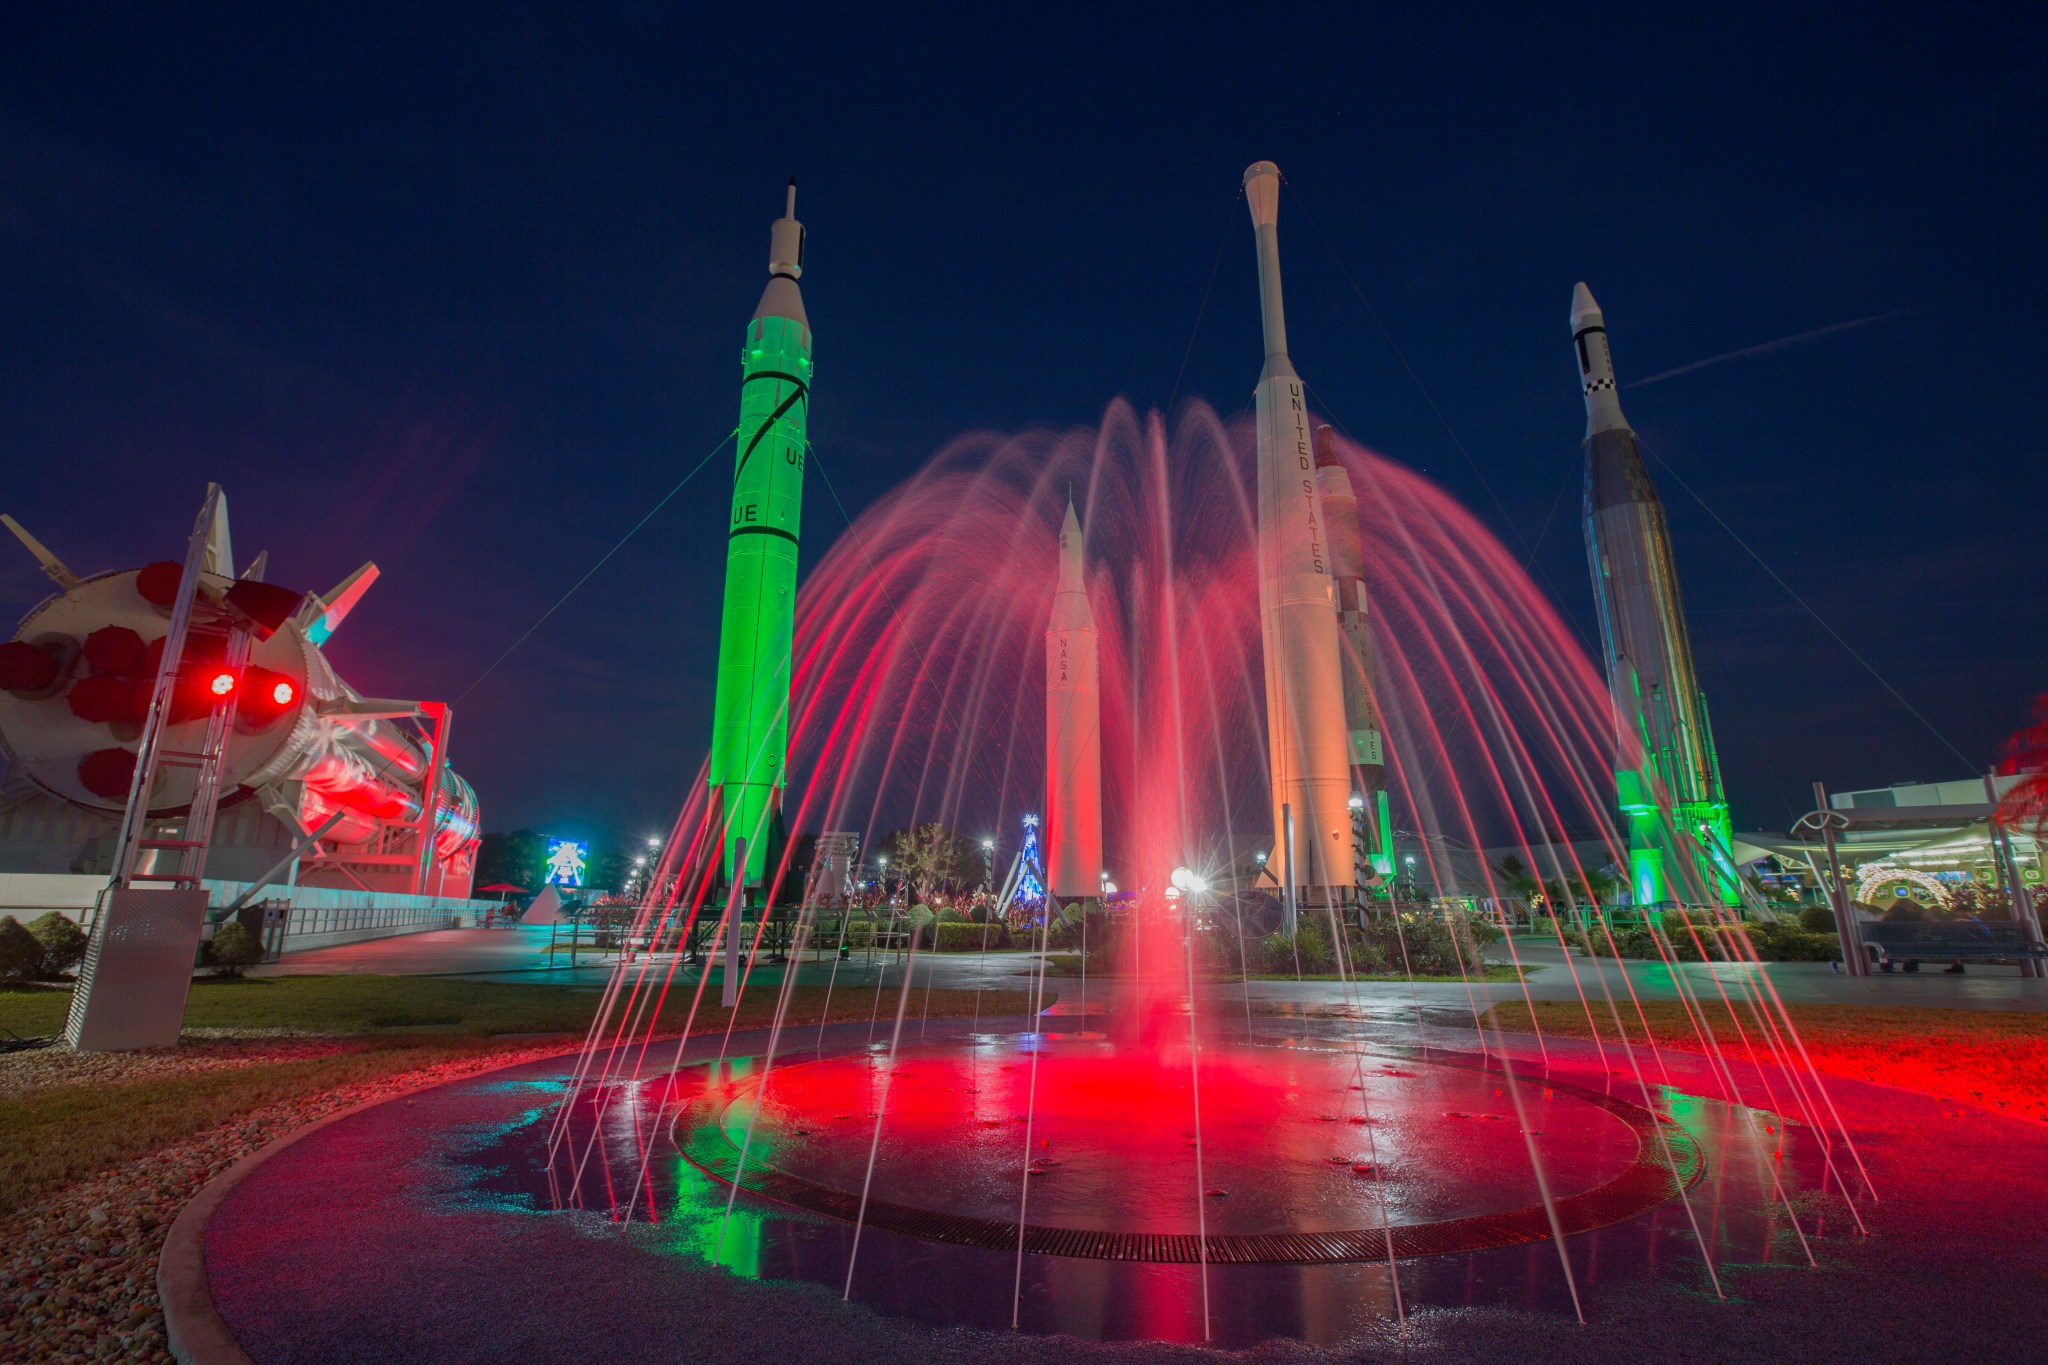 The Rocket Garden and fountain at the Kennedy Space Center Visitor Complex in Florida are lit in green and red for Holidays.